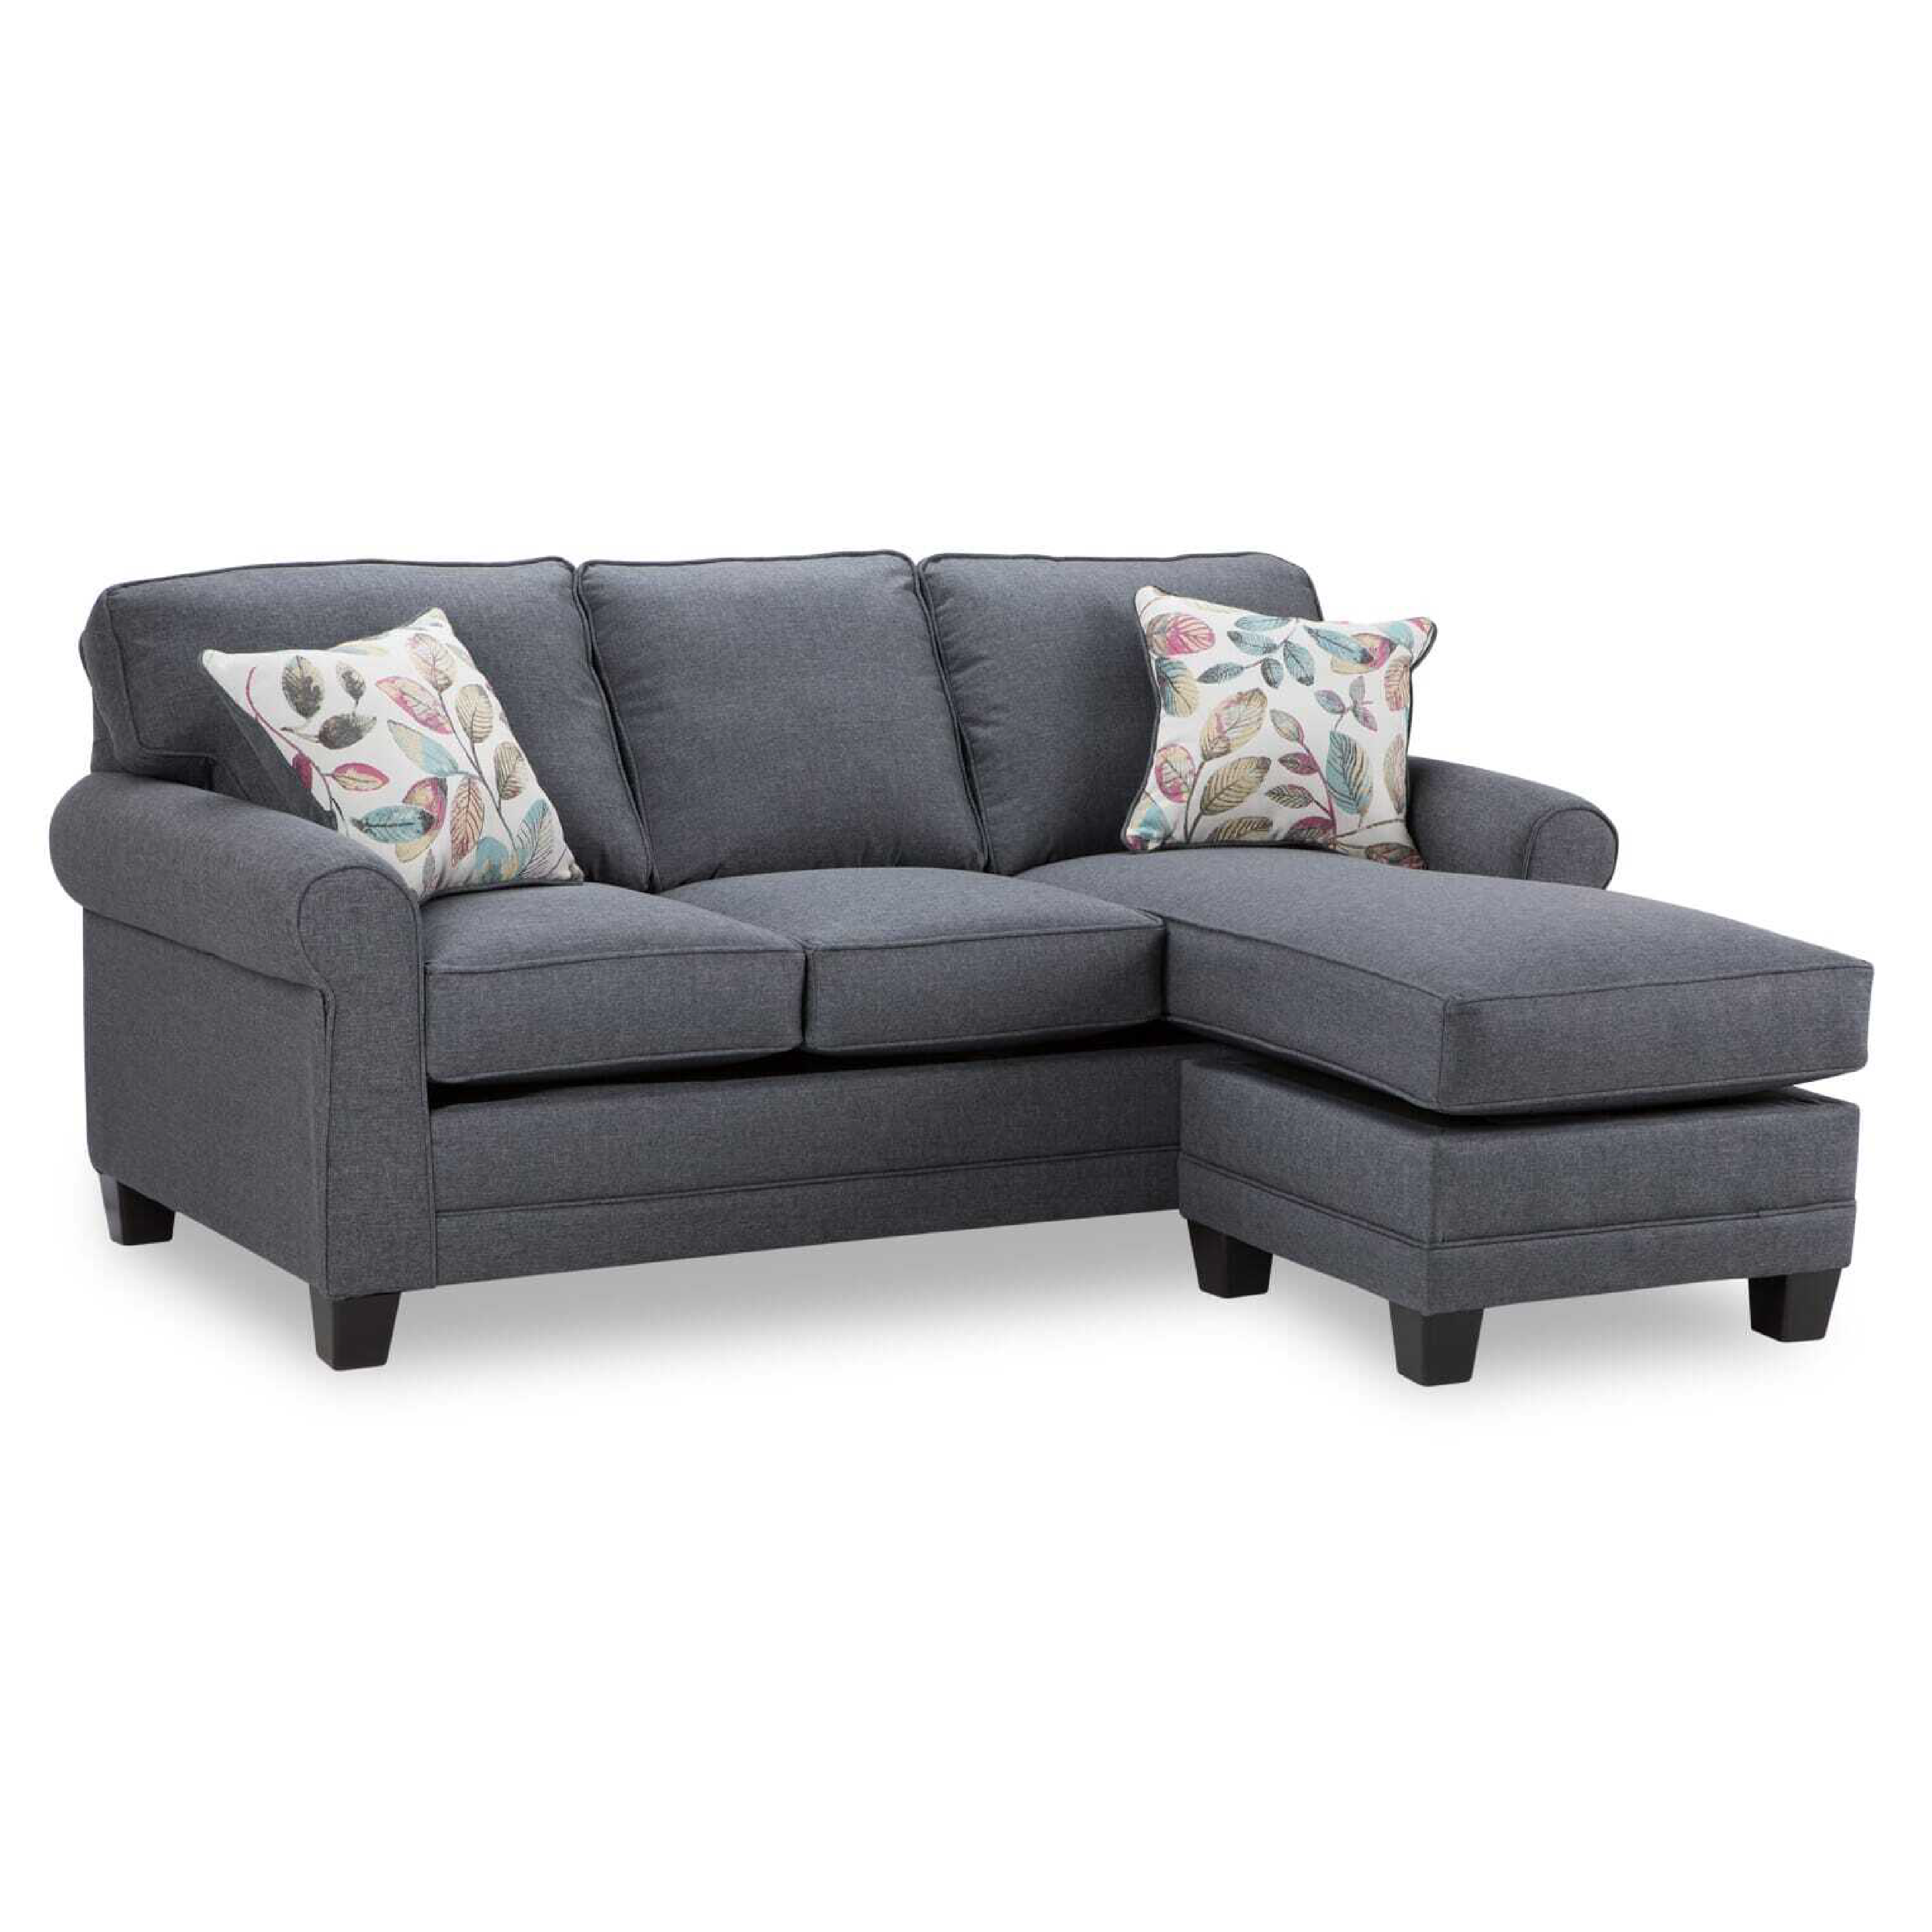 Addington Co Sheffield Left-Facing or Right-Facing Sectional Sofa with Chaise Ottoman